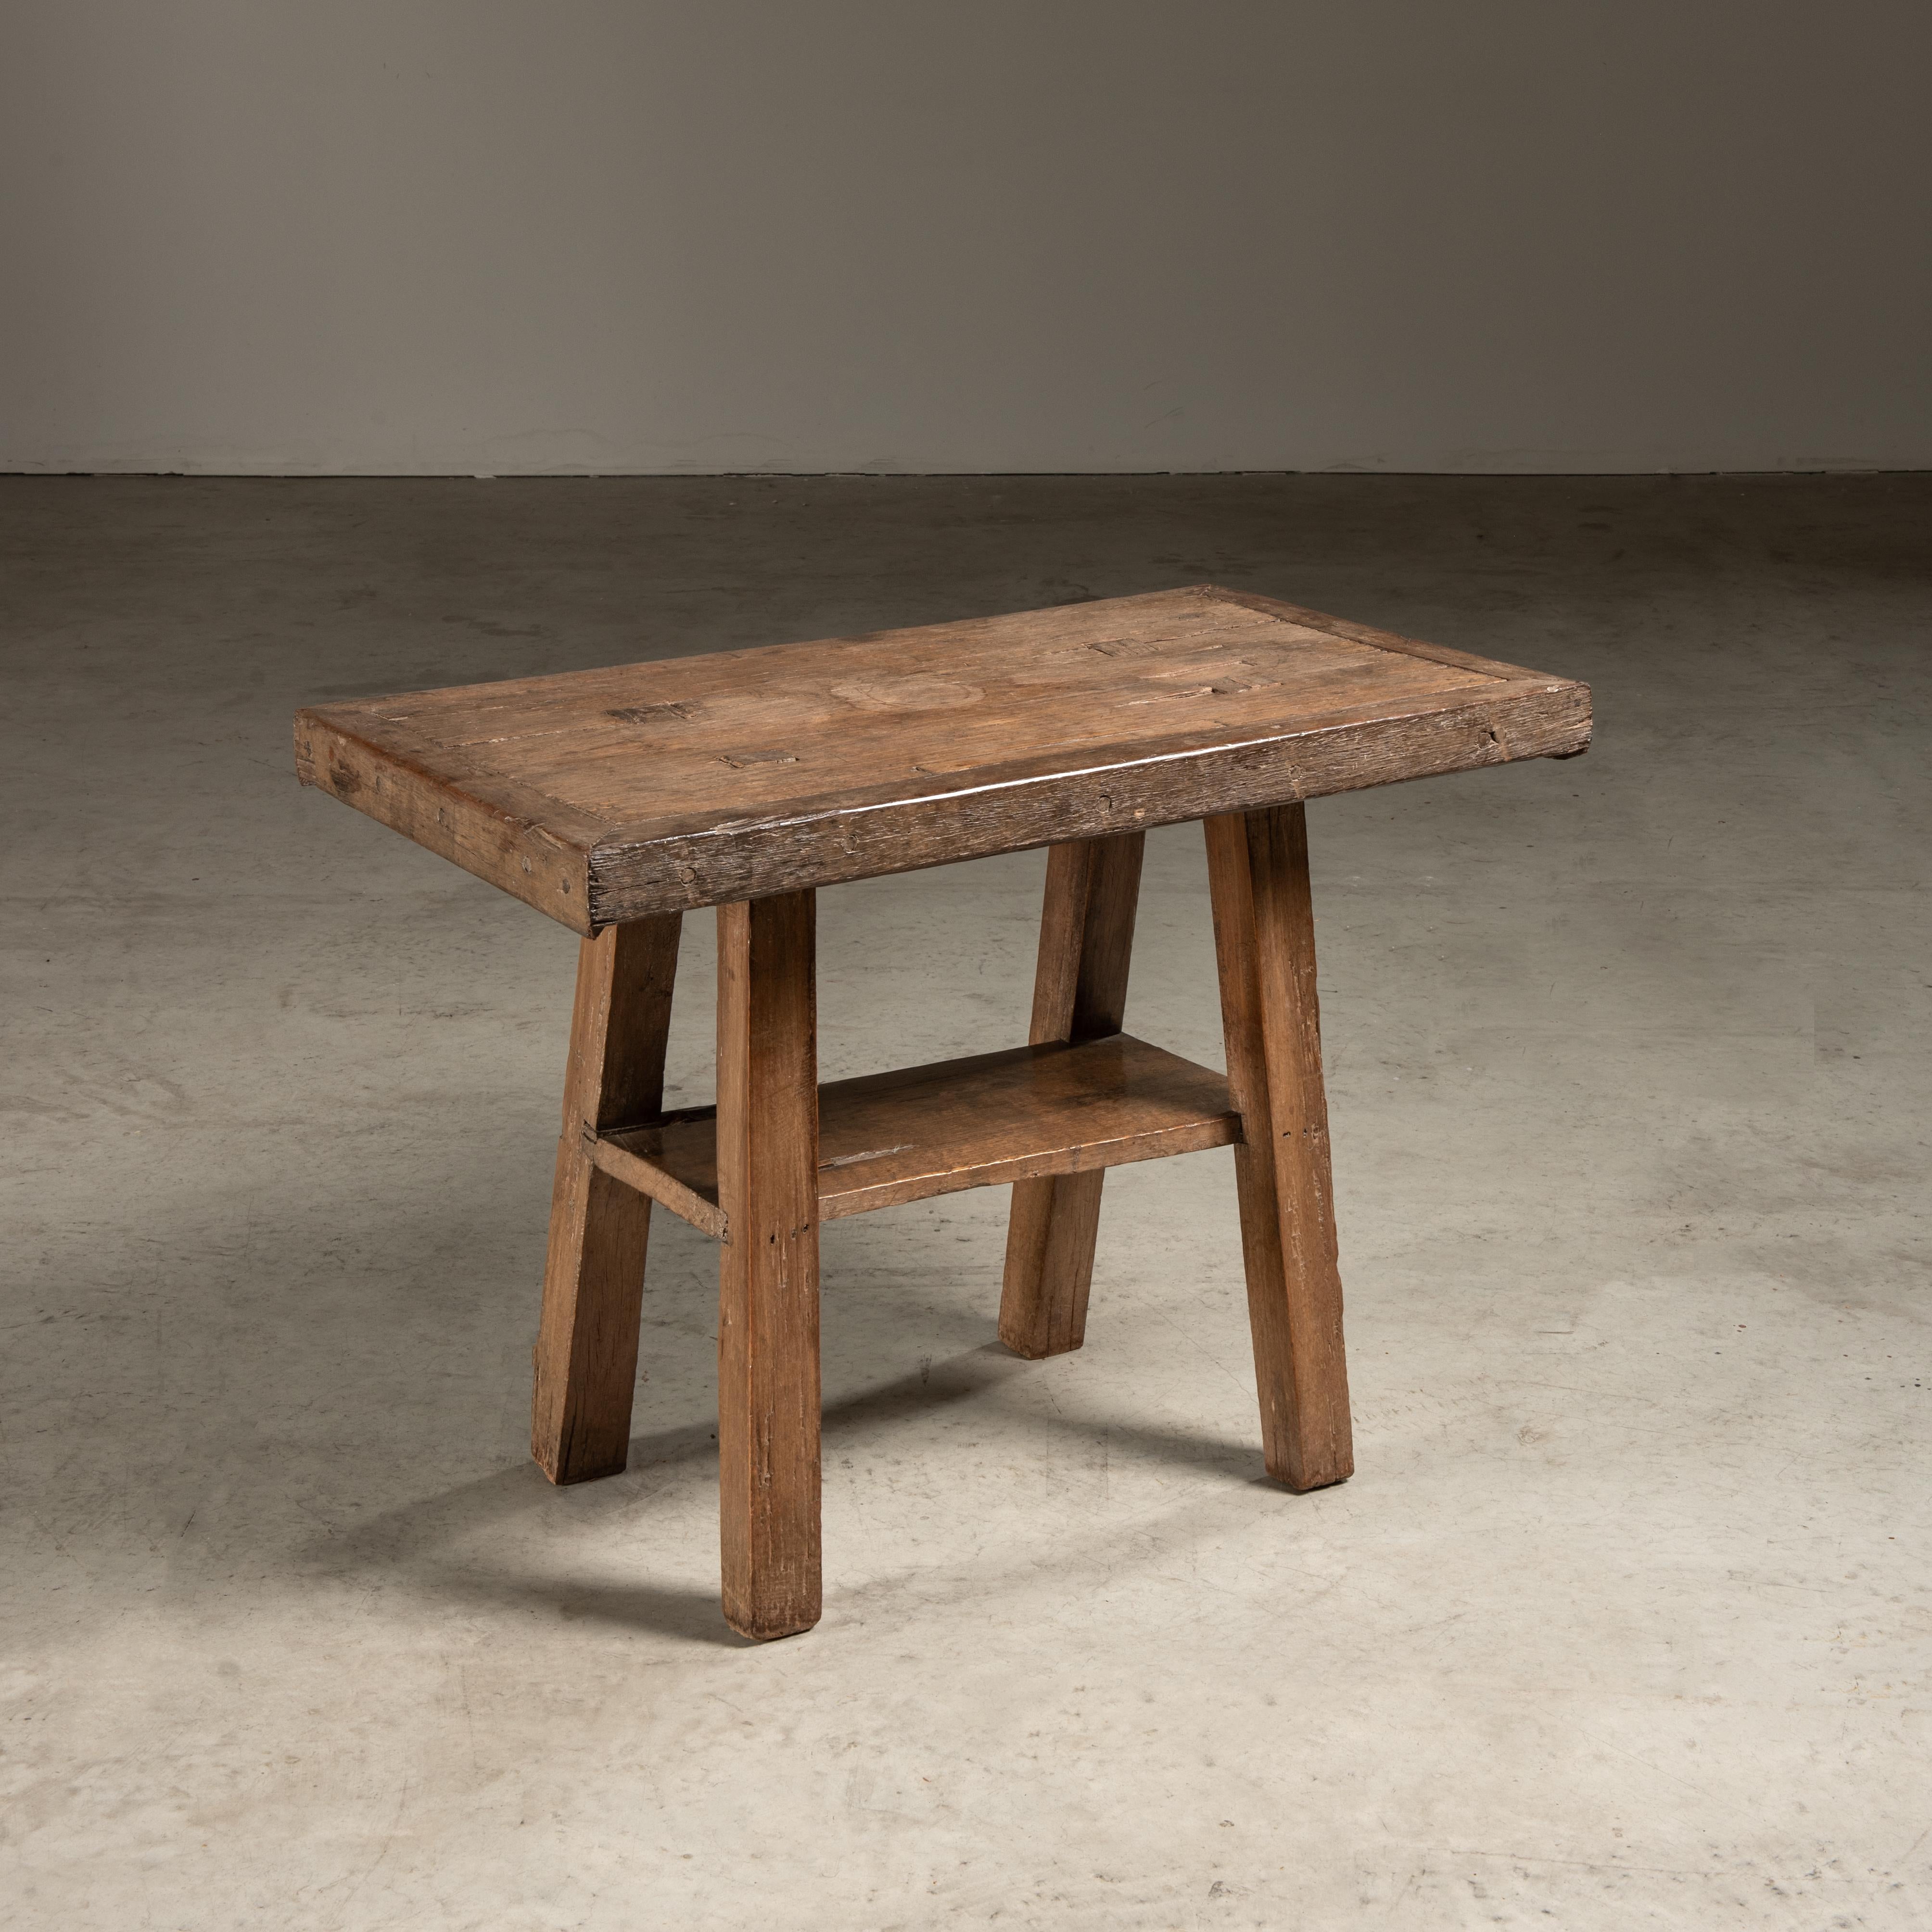 This 19th-century Brazilian side table is a remarkable find, not only for its age but for the exceptional condition that suggests a cherished history and preservation. The table exemplifies vernacular design - the art of everyday, traditional